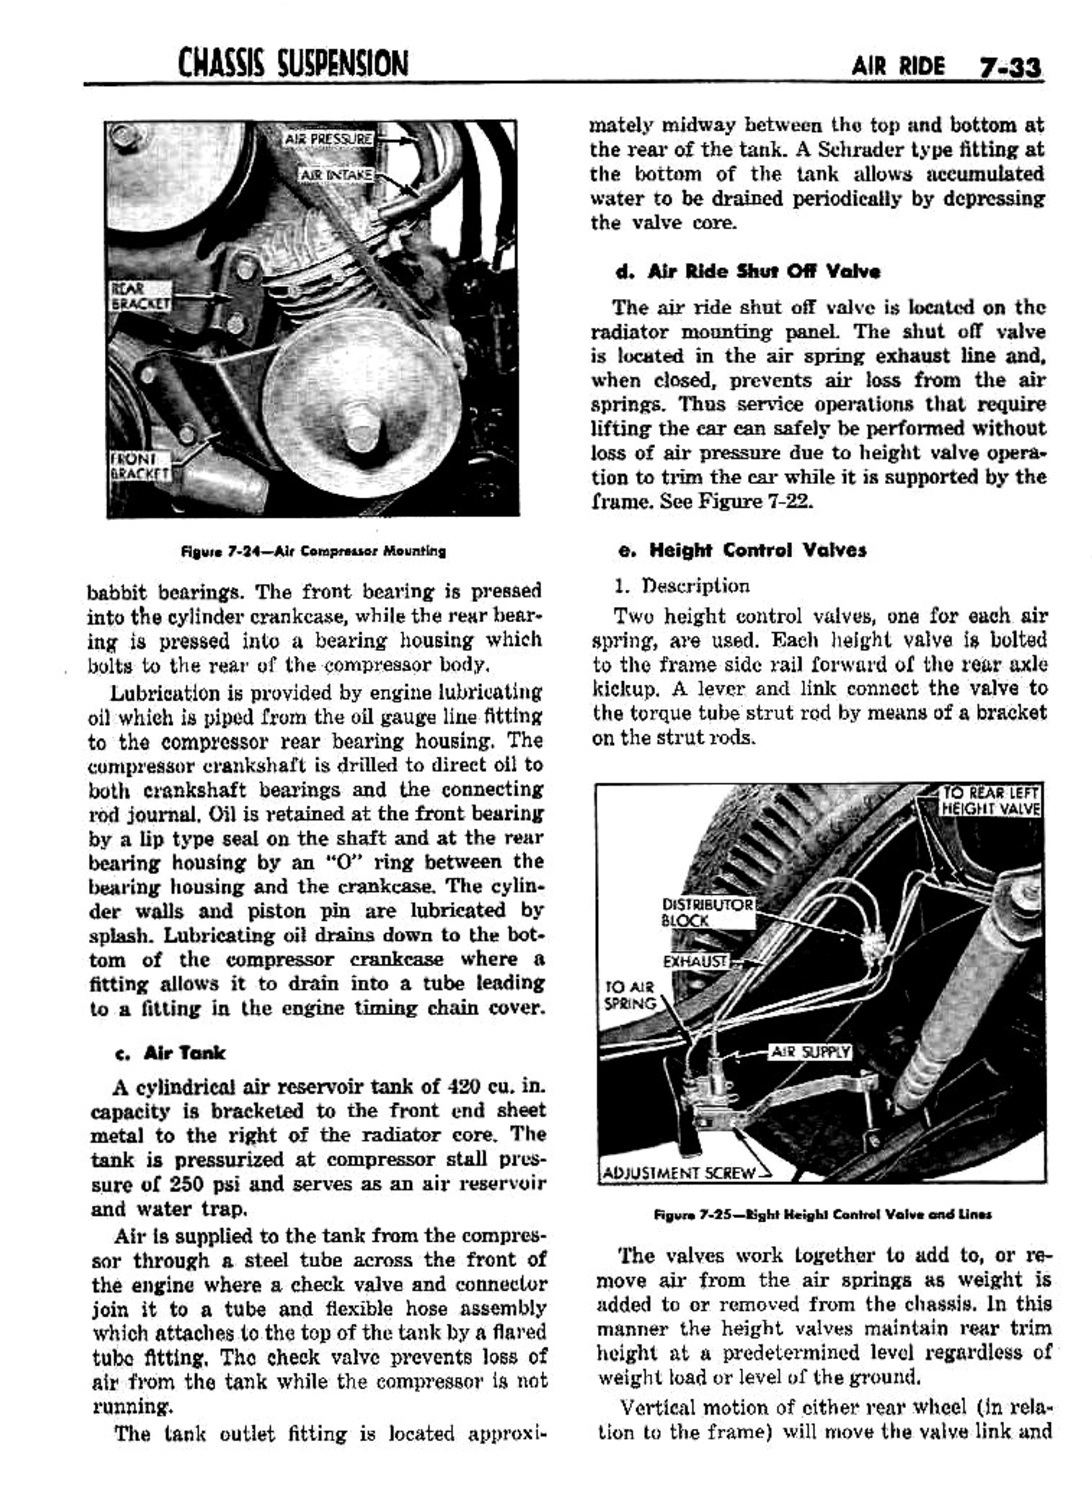 n_08 1959 Buick Shop Manual - Chassis Suspension-033-033.jpg